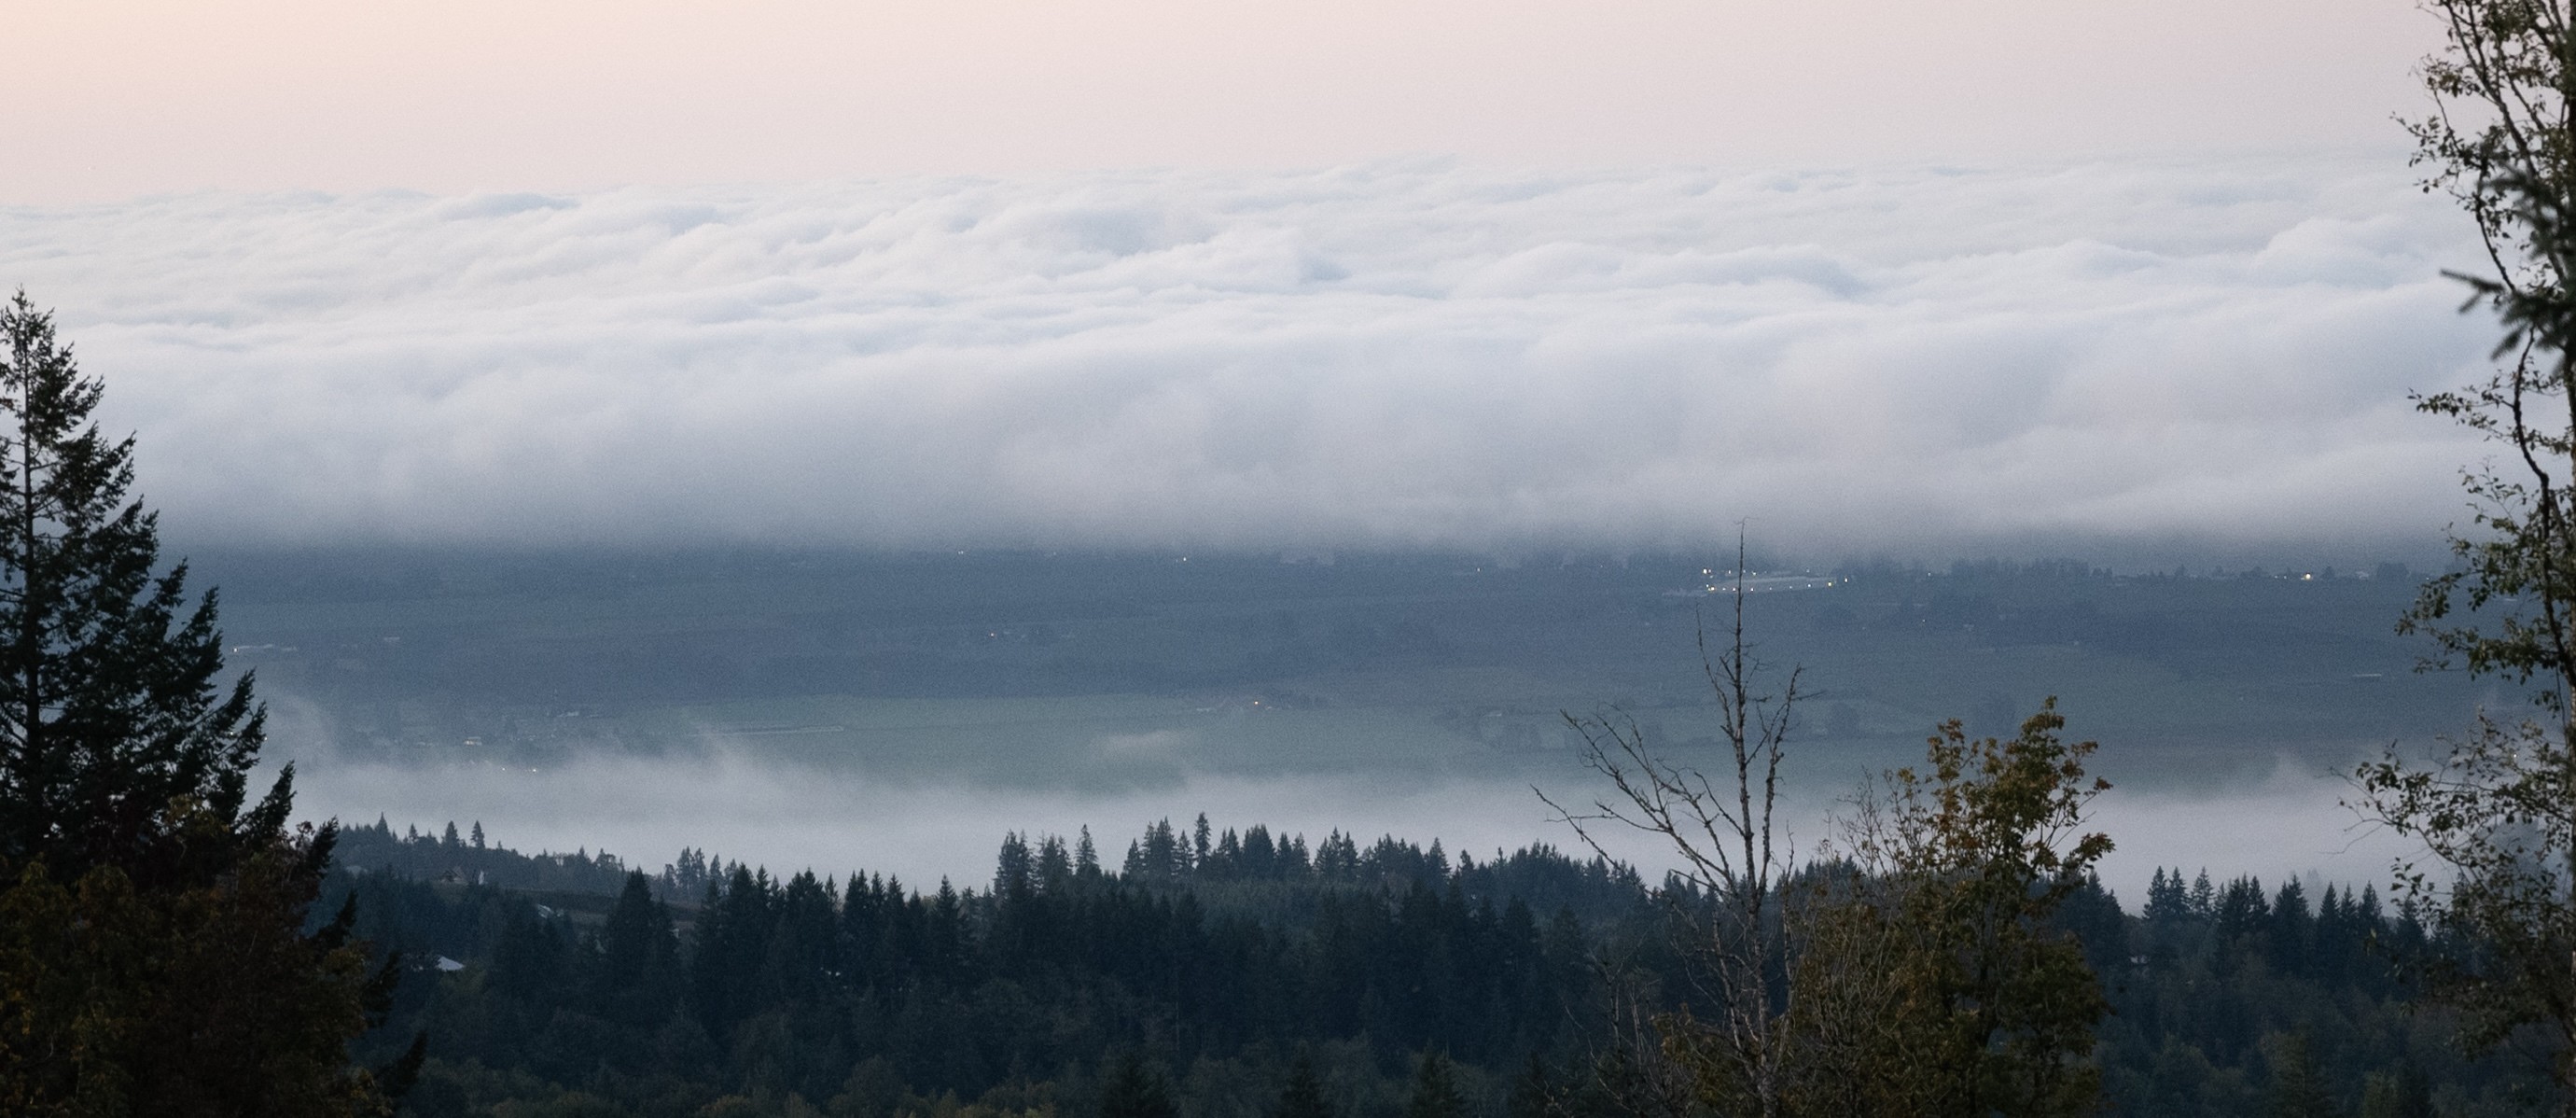 Photo of trees, river, thick cloud layer, morning sky.